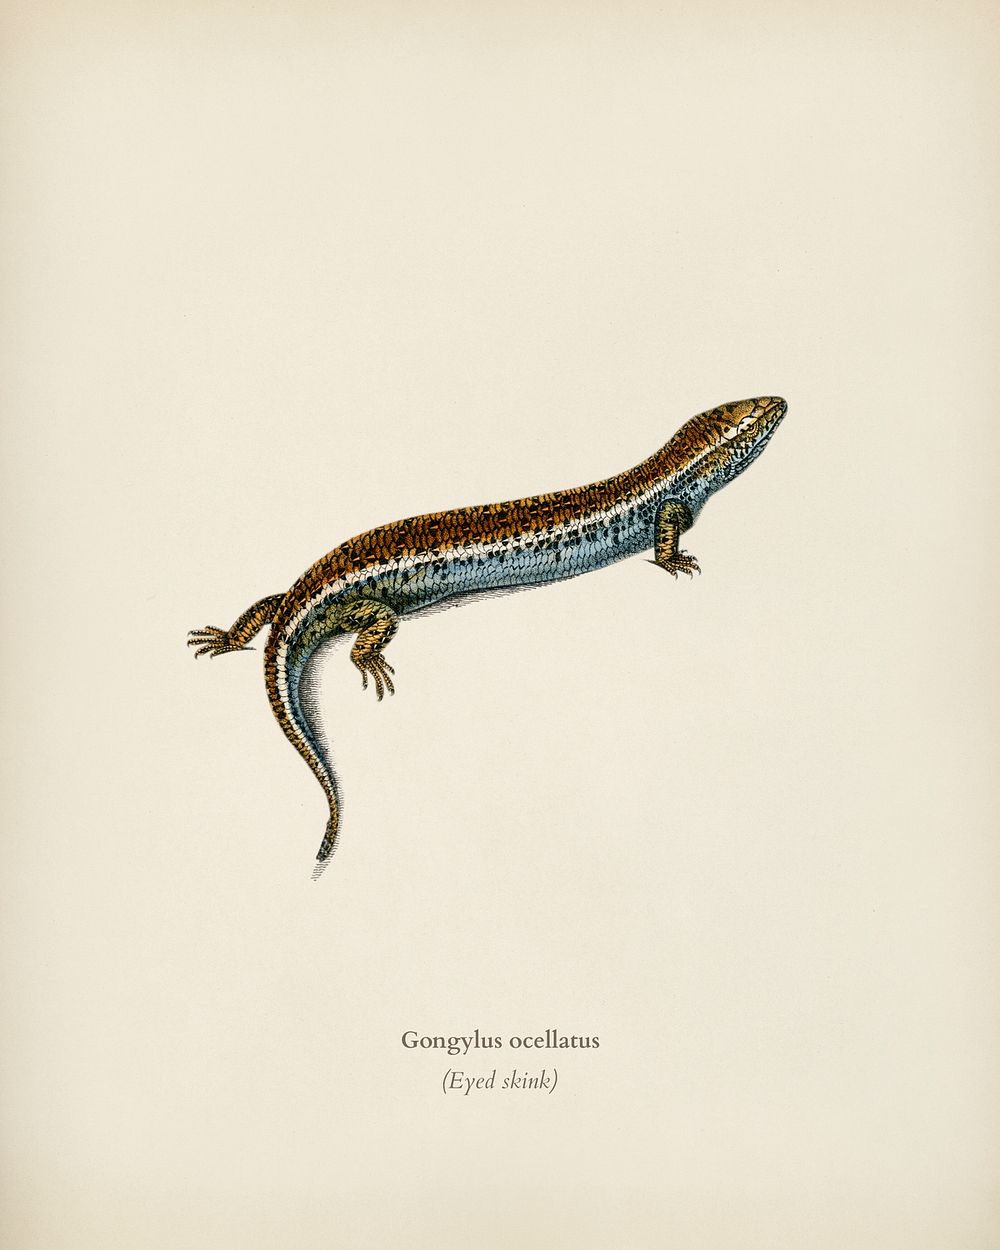 Eyed skink (Gongylus ocellatus) illustrated by Charles Dessalines D' Orbigny (1806-1876). Digitally enhanced from our own…